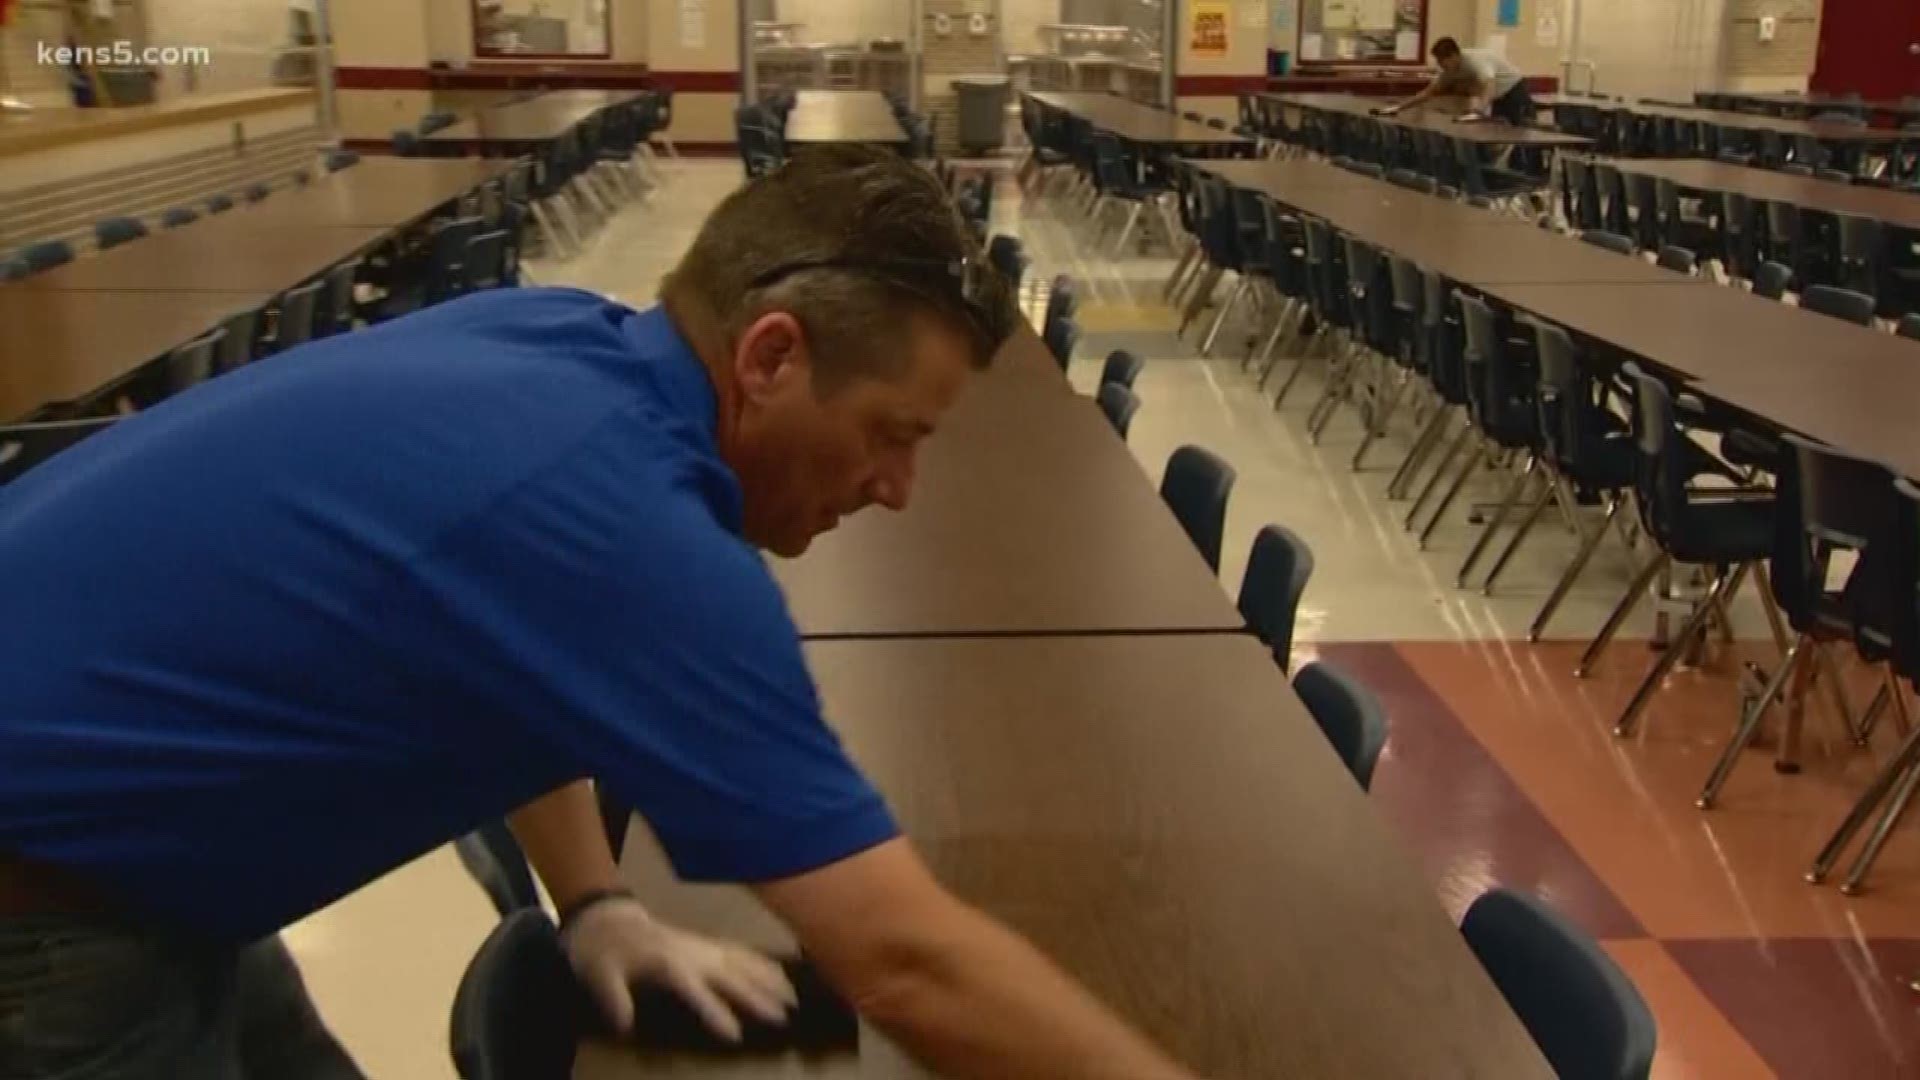 Bill Taylor heads out to Briscoe Middle School and finds out how Patty keeps things clean.